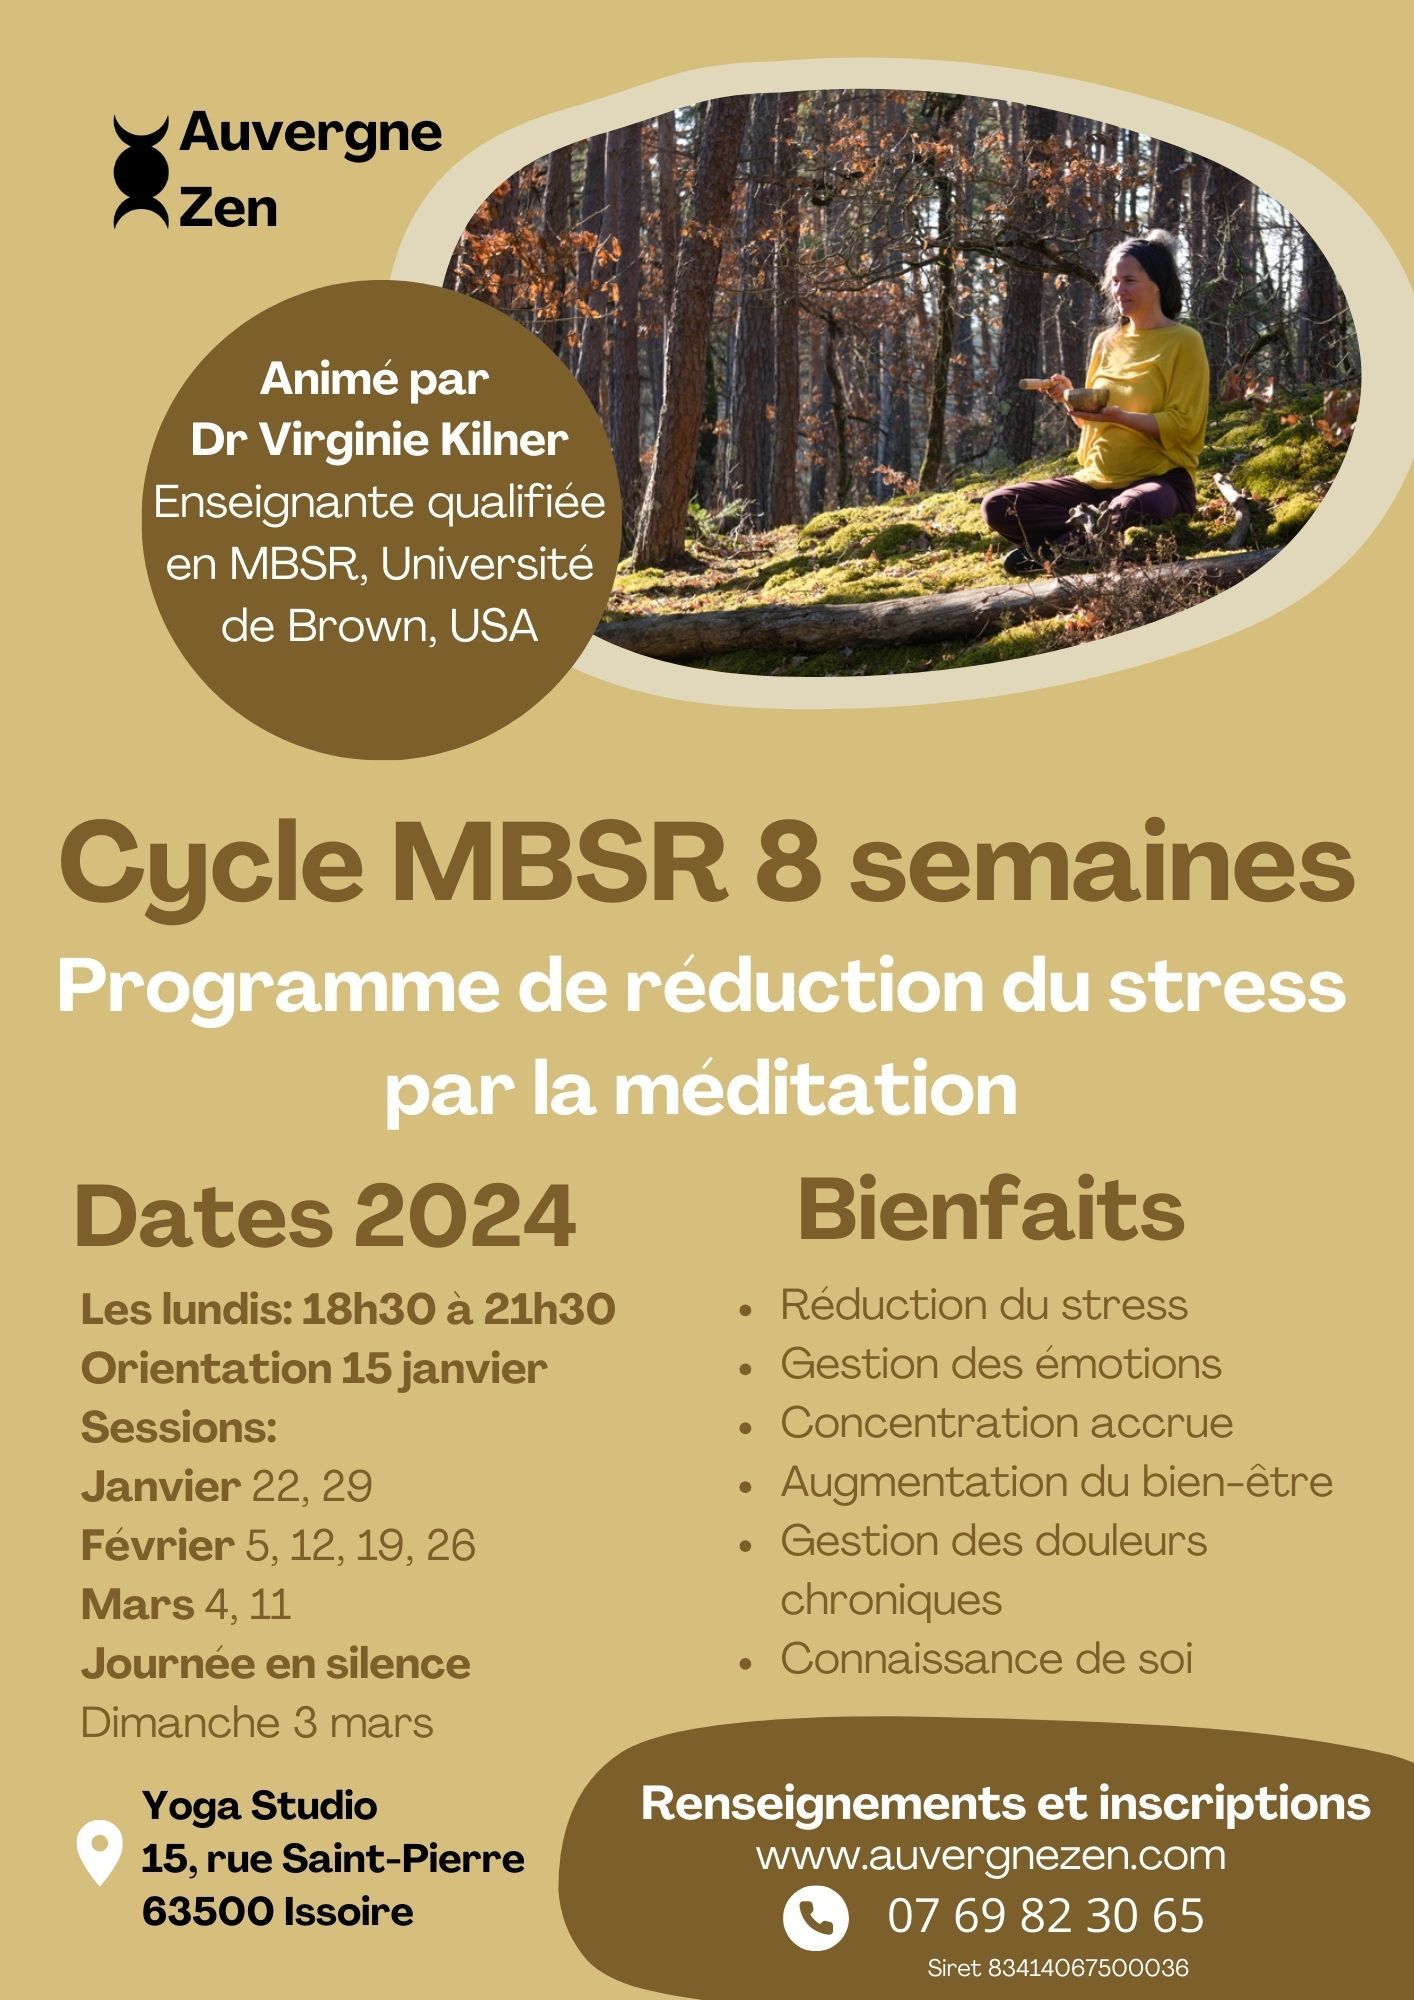 Cycle MBSR 8 semaines Janvier-Mars 2024 à Issoire - COMPLET